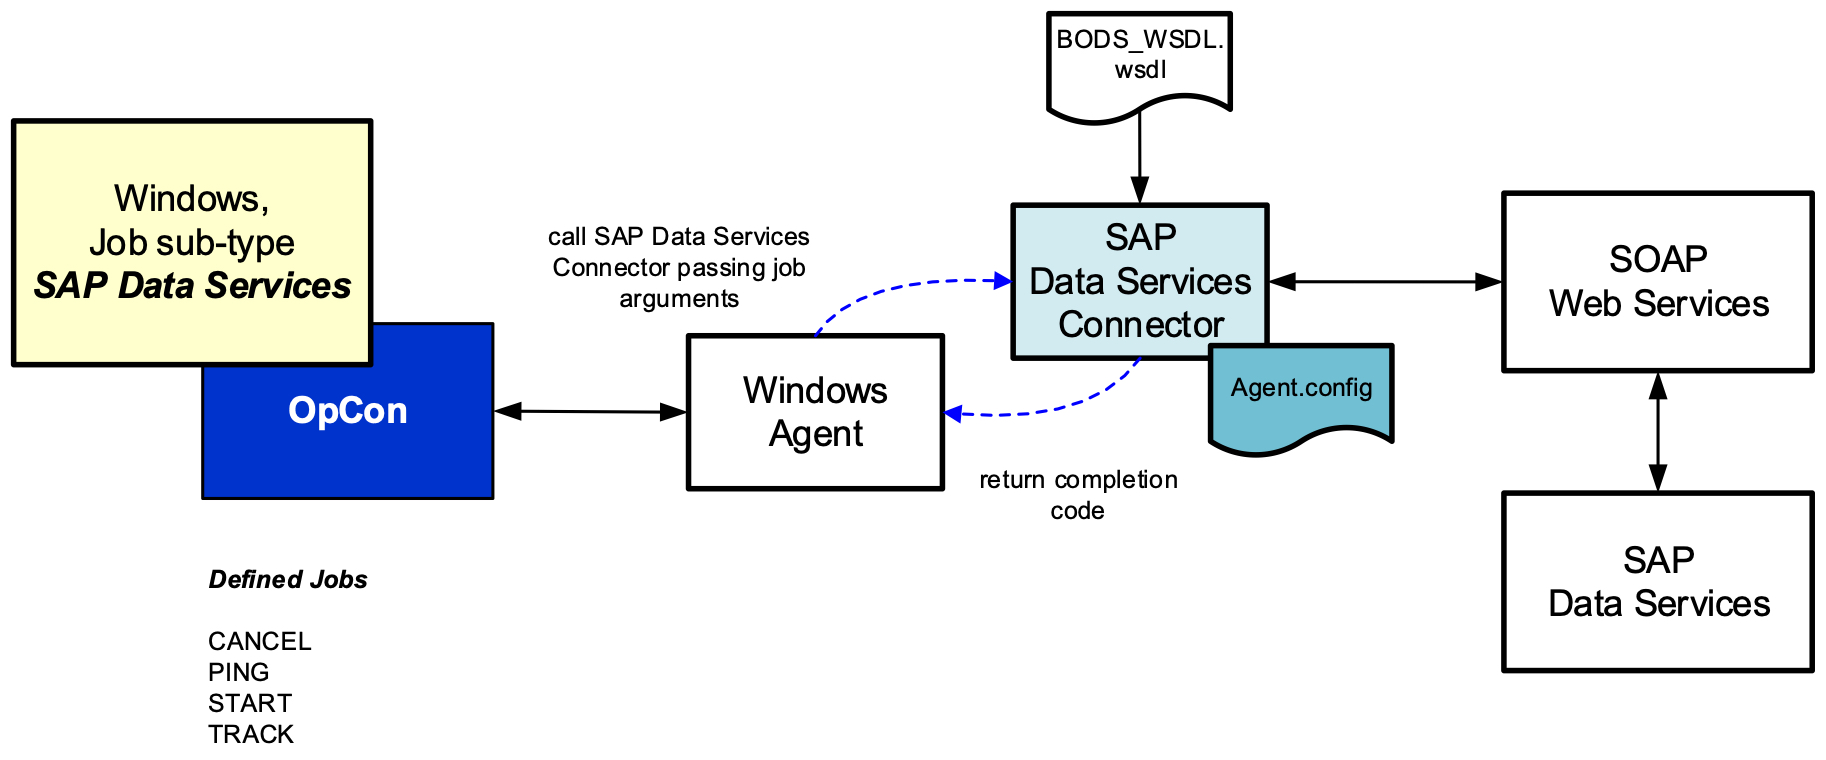 SAP DataServices Connector Overview